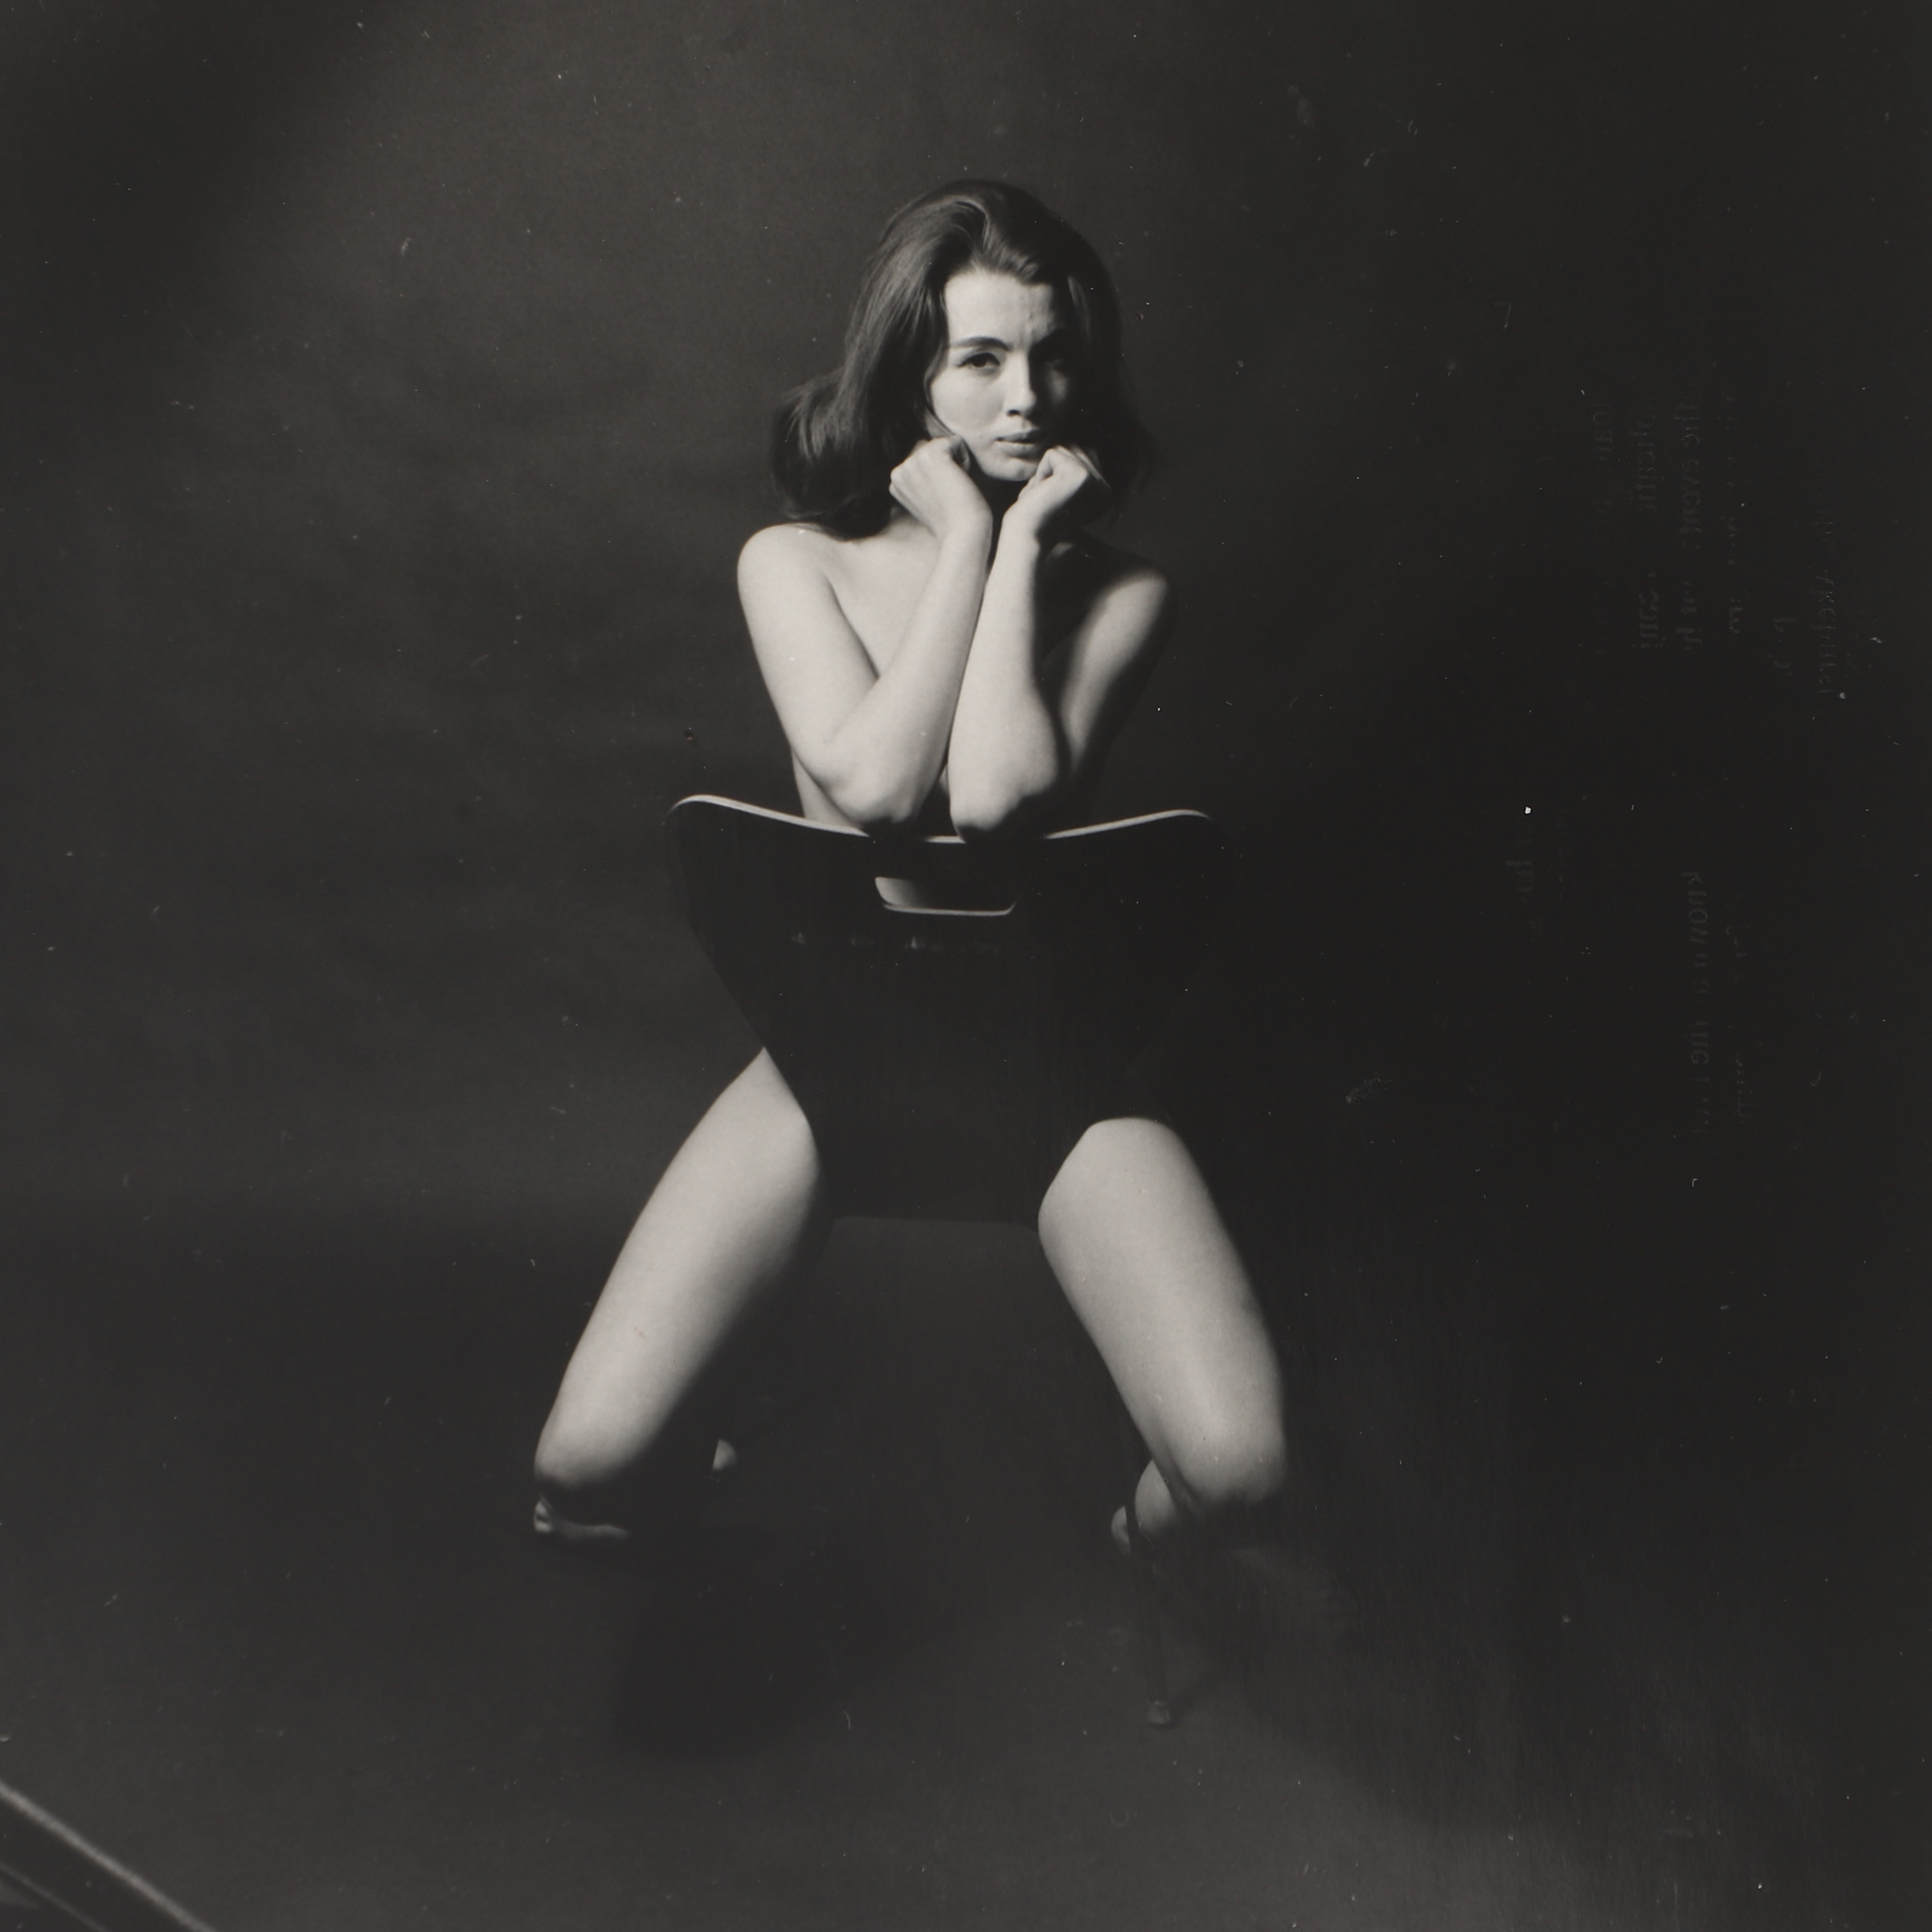 Lewis Morley (1925-2013) 1963, a photograph of a naked Christine Keeler, sitting astride an Arne Jacobsen-style chair (now in the V&A Museum) (£500-800)